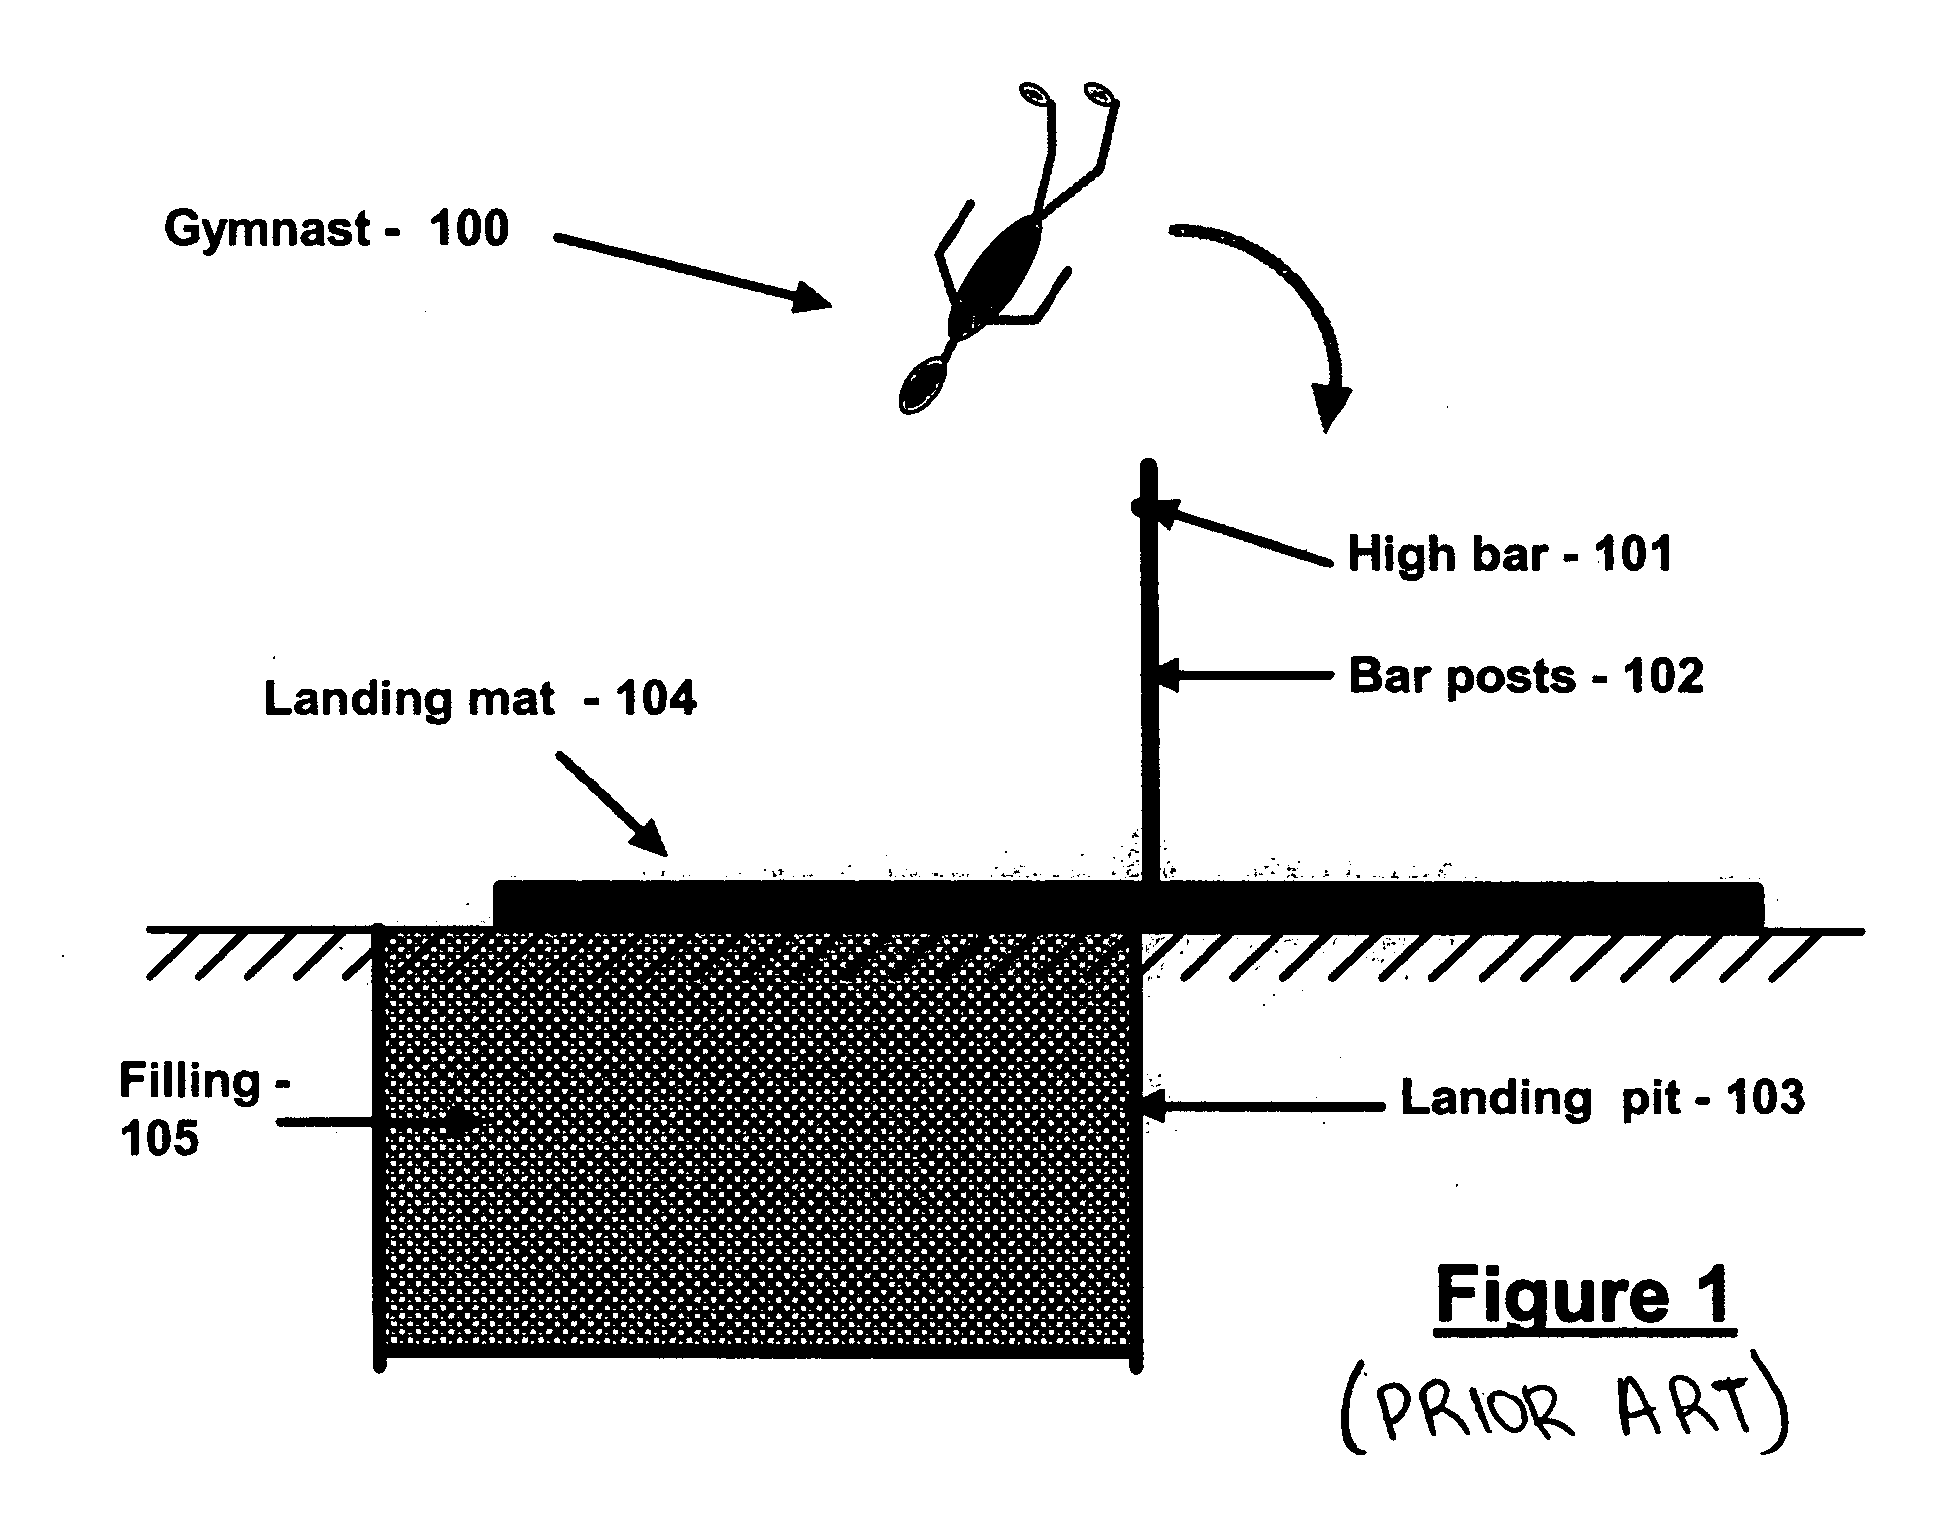 Safety devices and methods for gymnastics and other activities